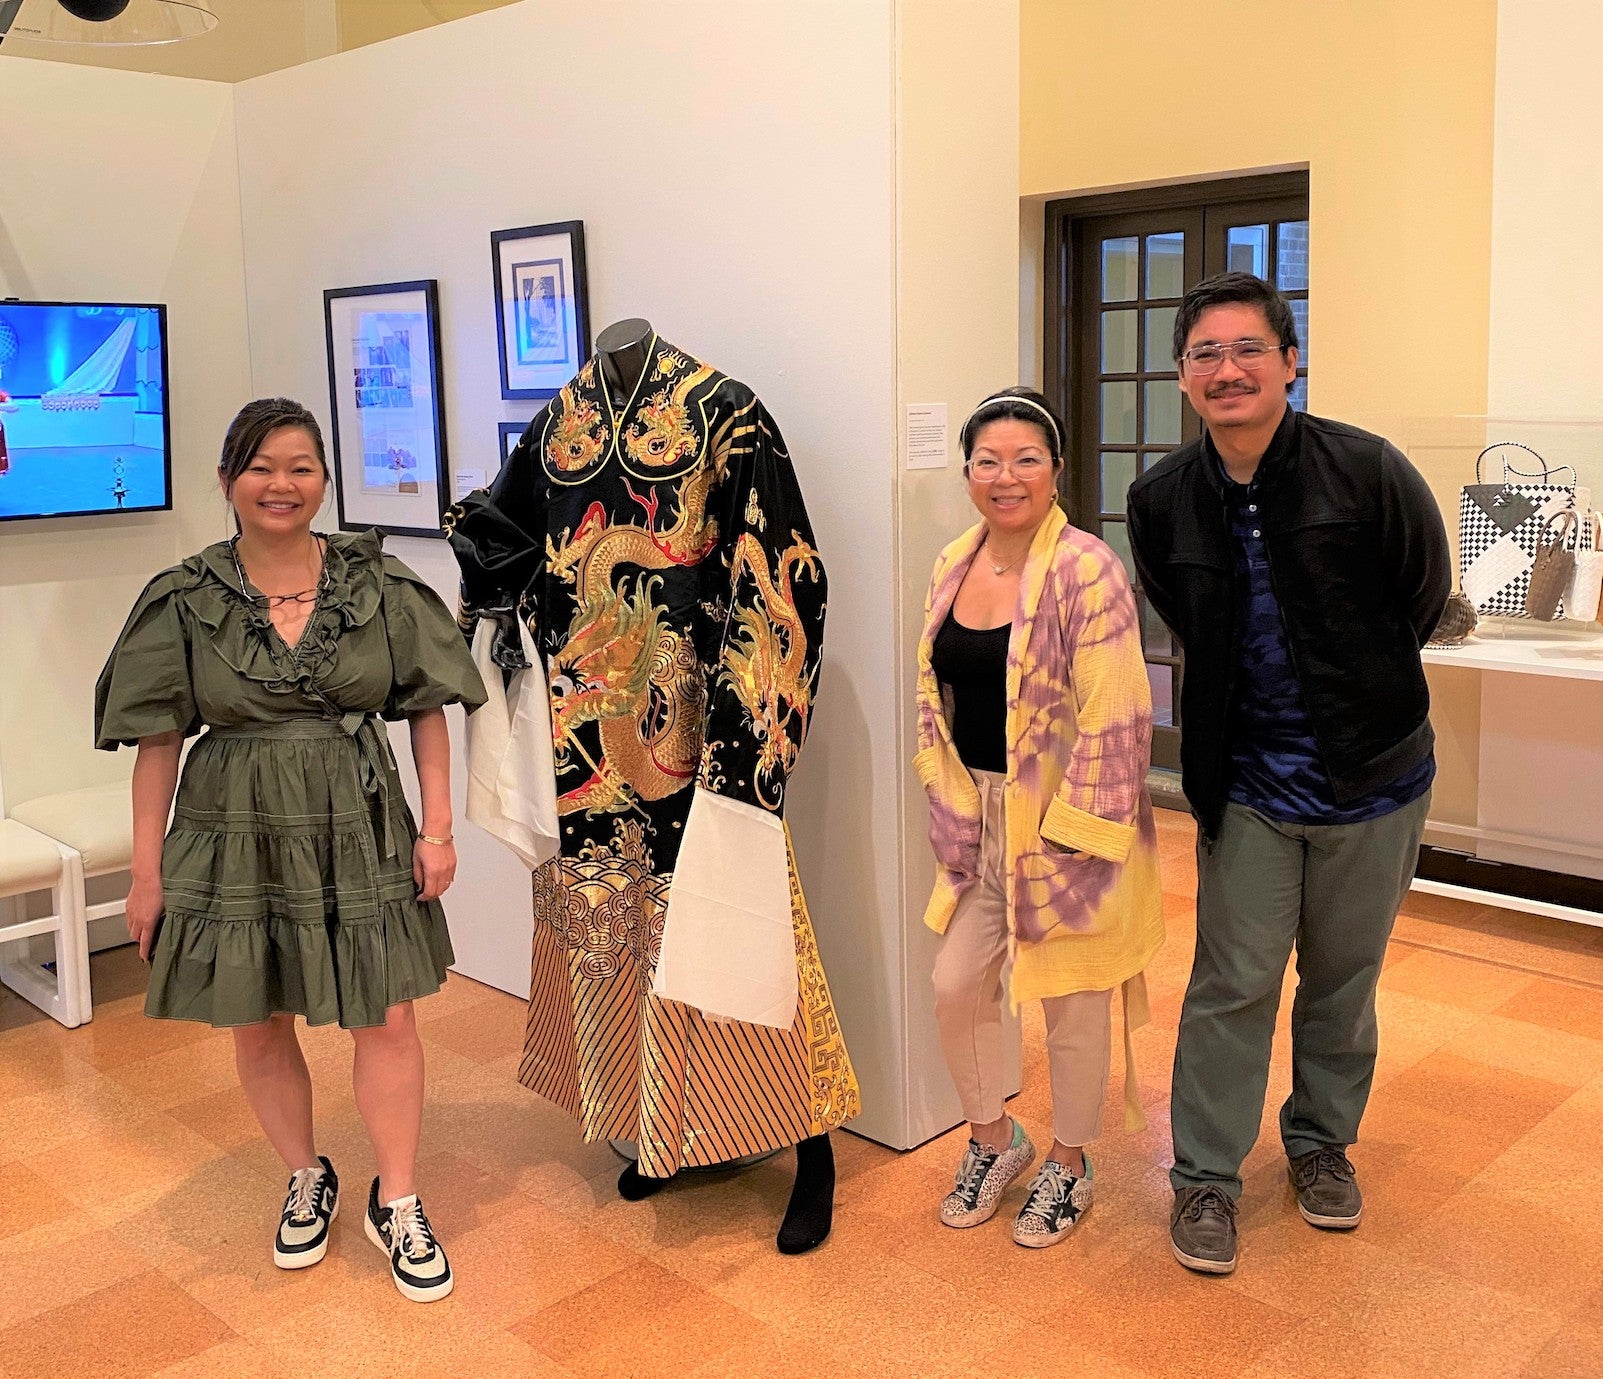 Two women and a man pose with a manequin wearing an elaborate kimono